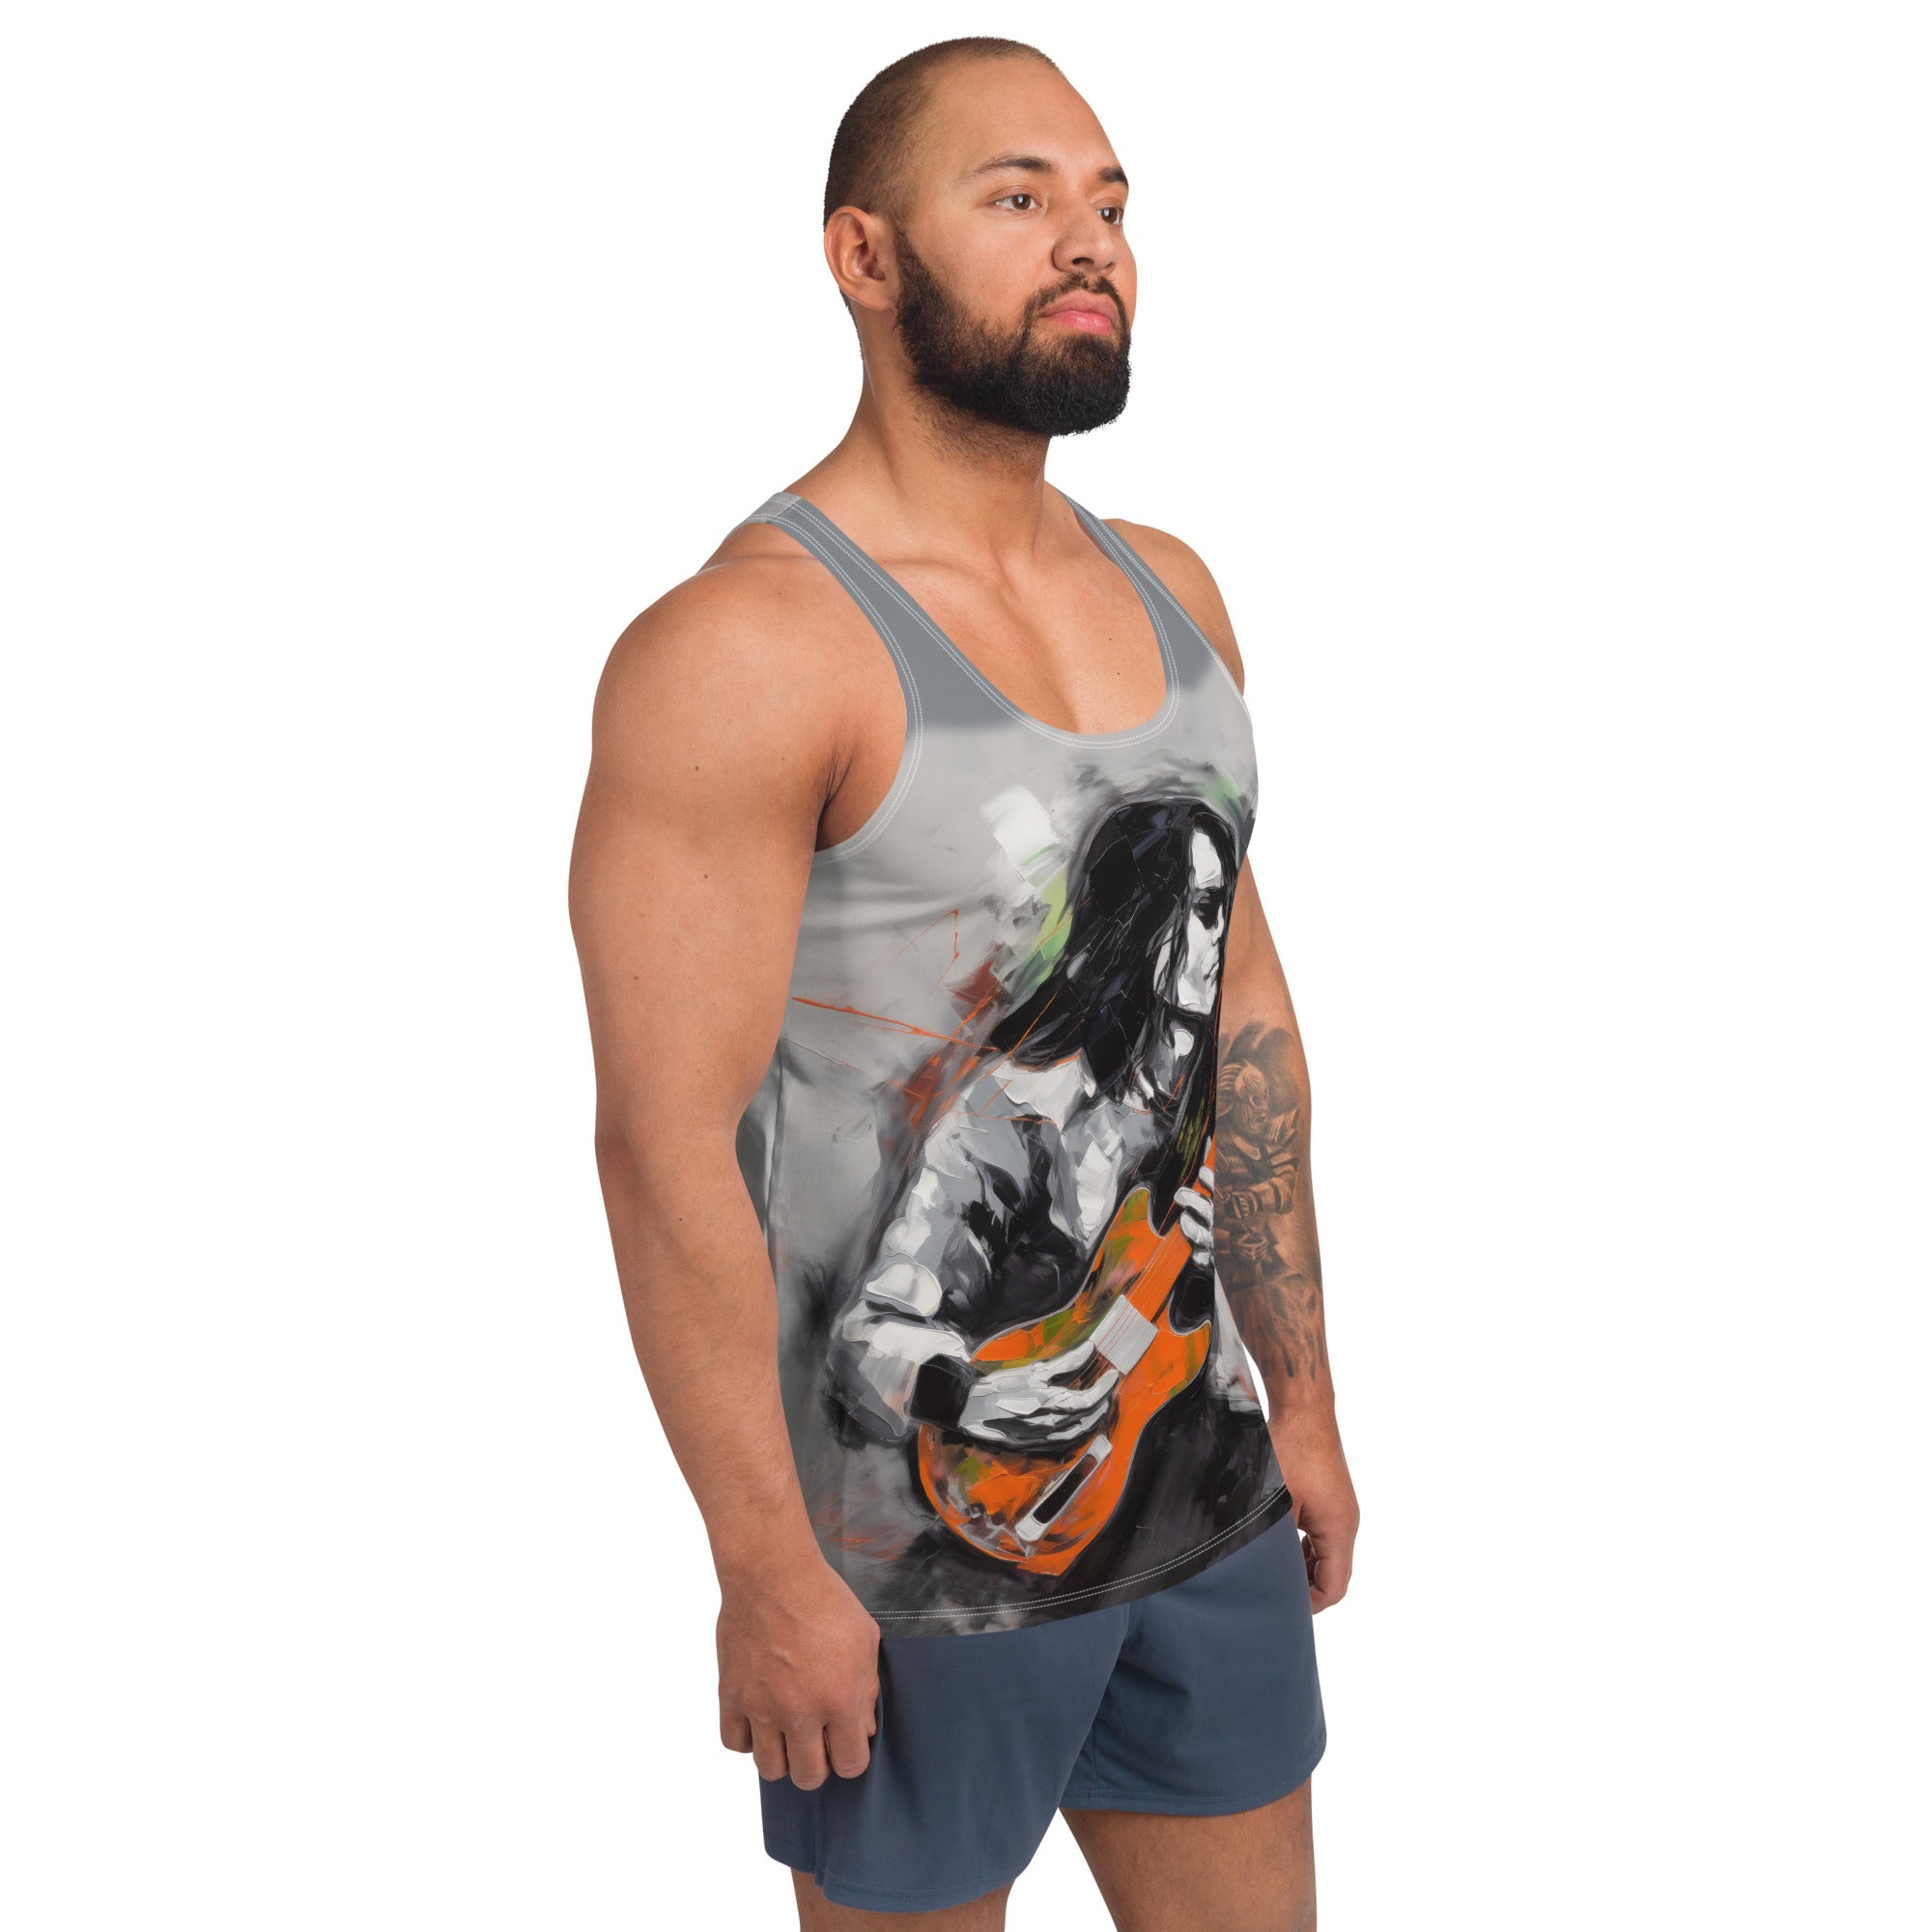 Men's casual tank top featuring forest design.